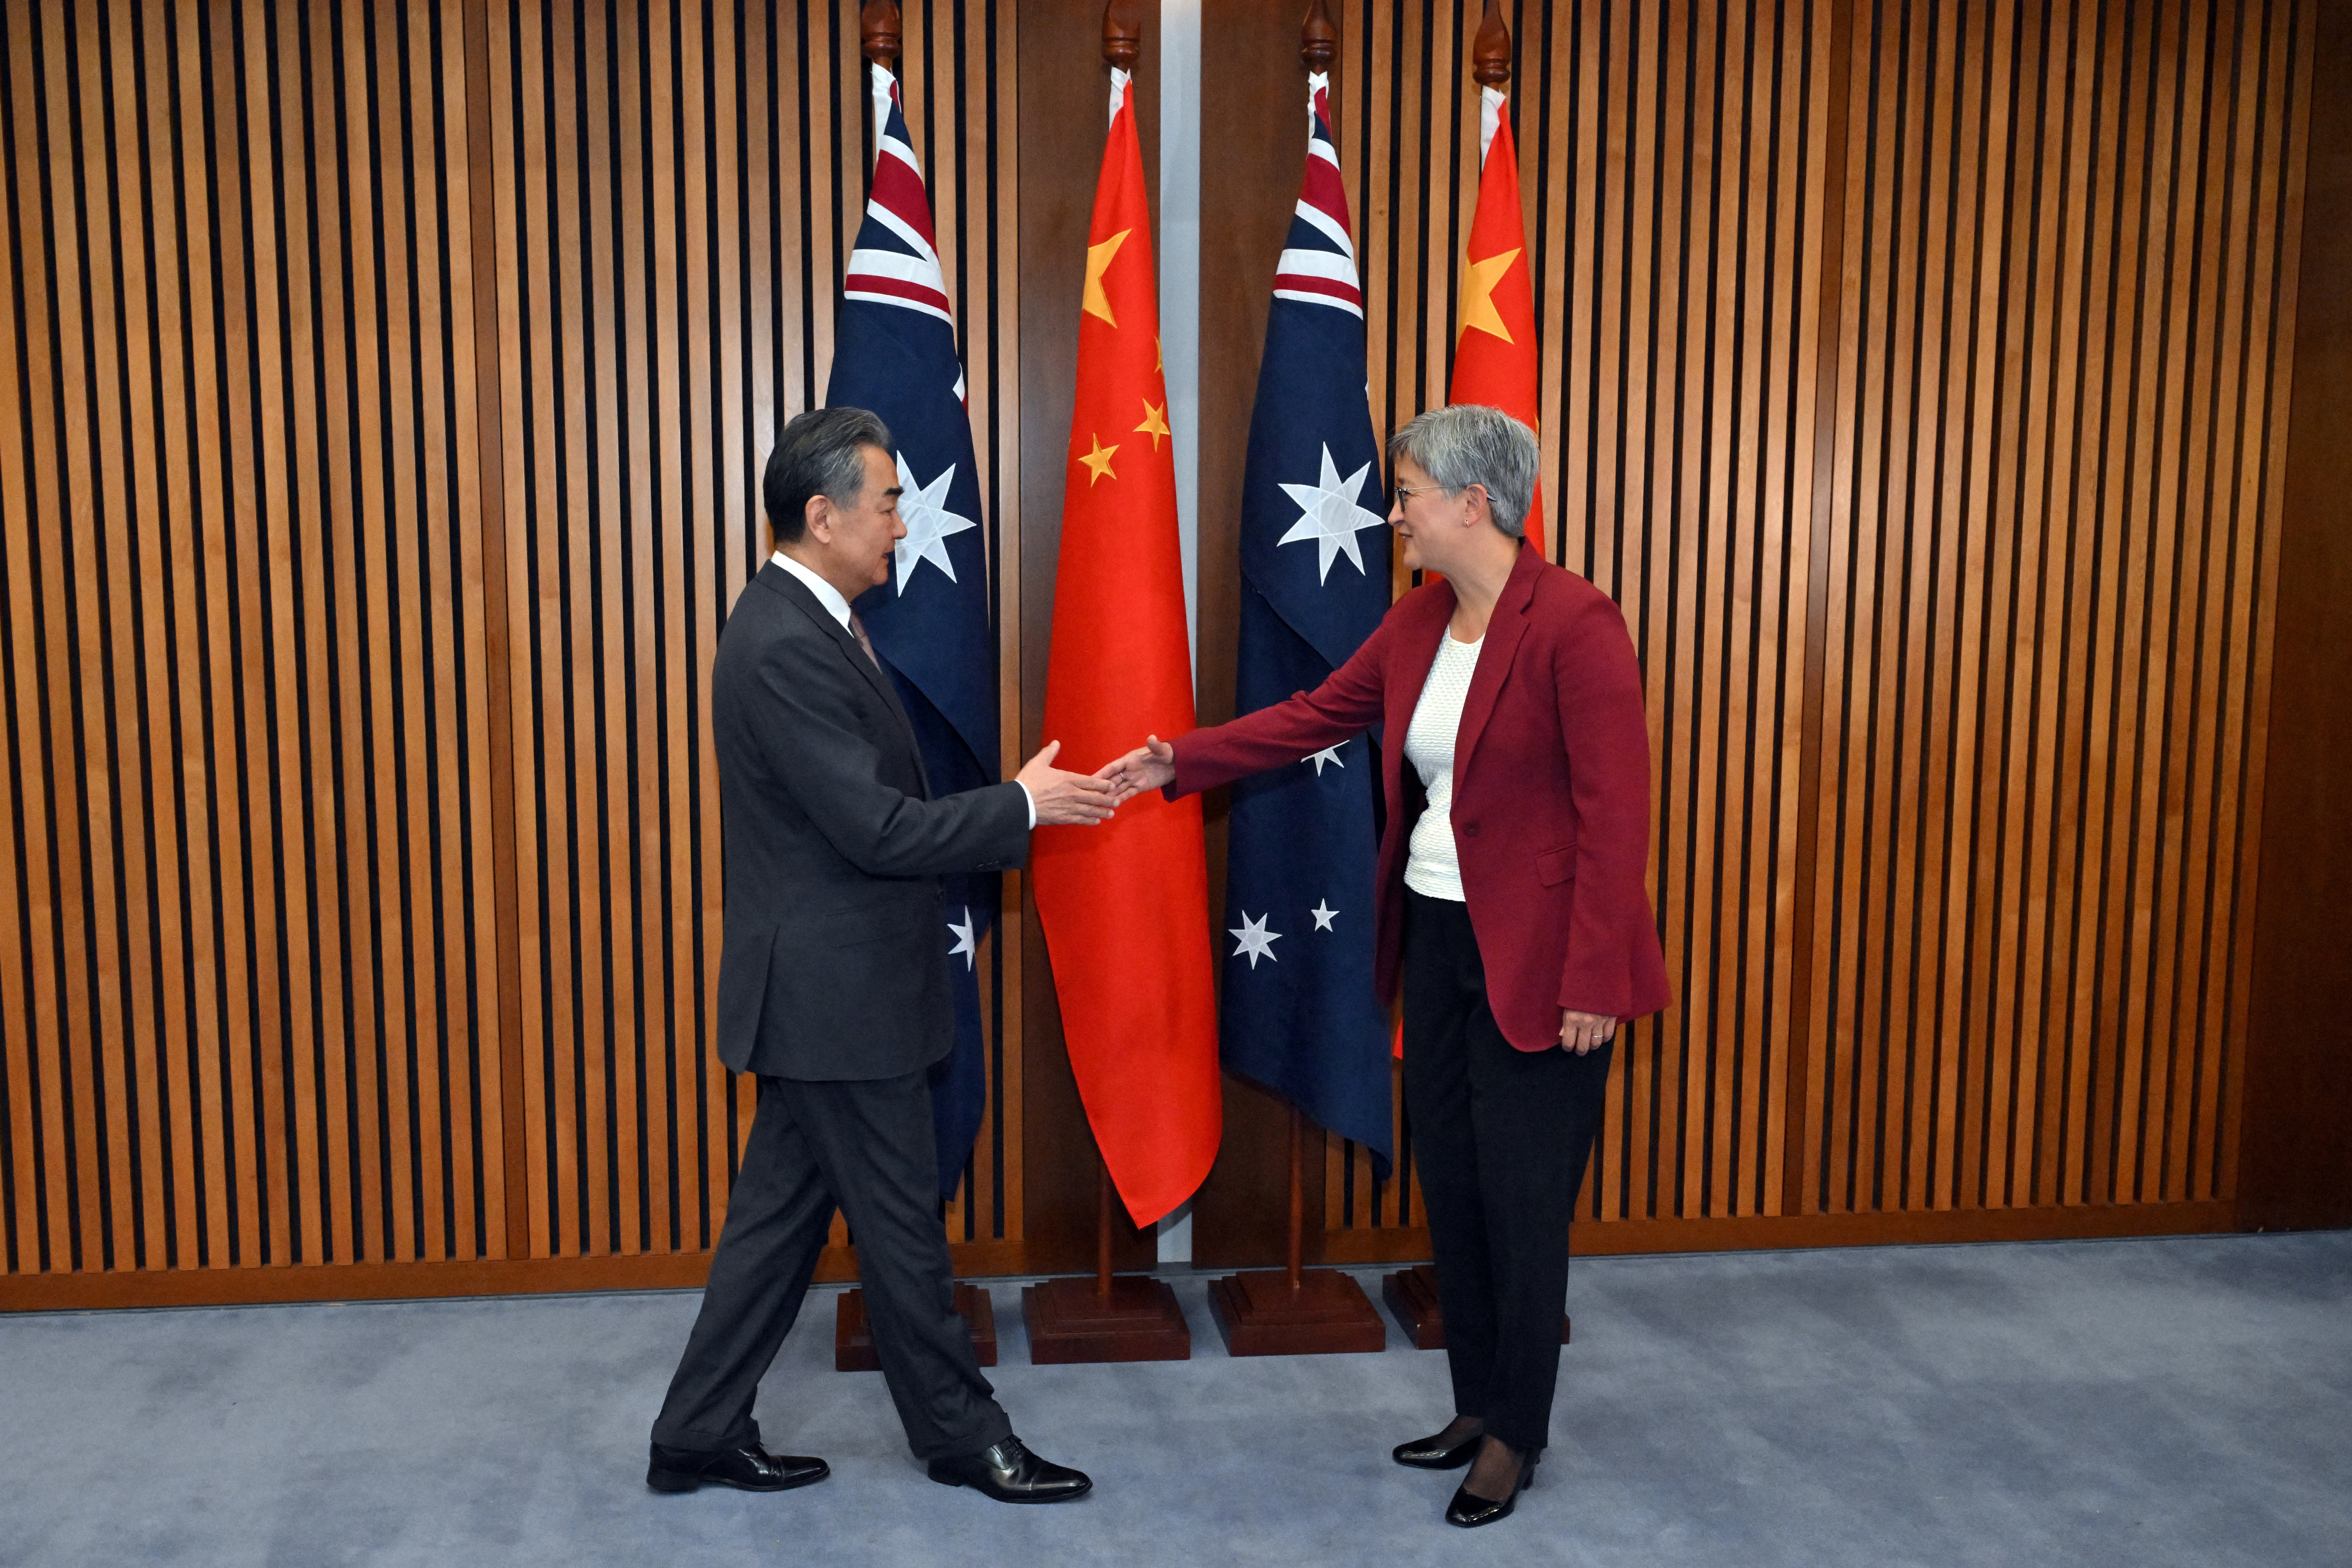 China's Foreign Minister Wang Yi meets with Australia's Foreign Affairs Minister Penny Wong in Canberra